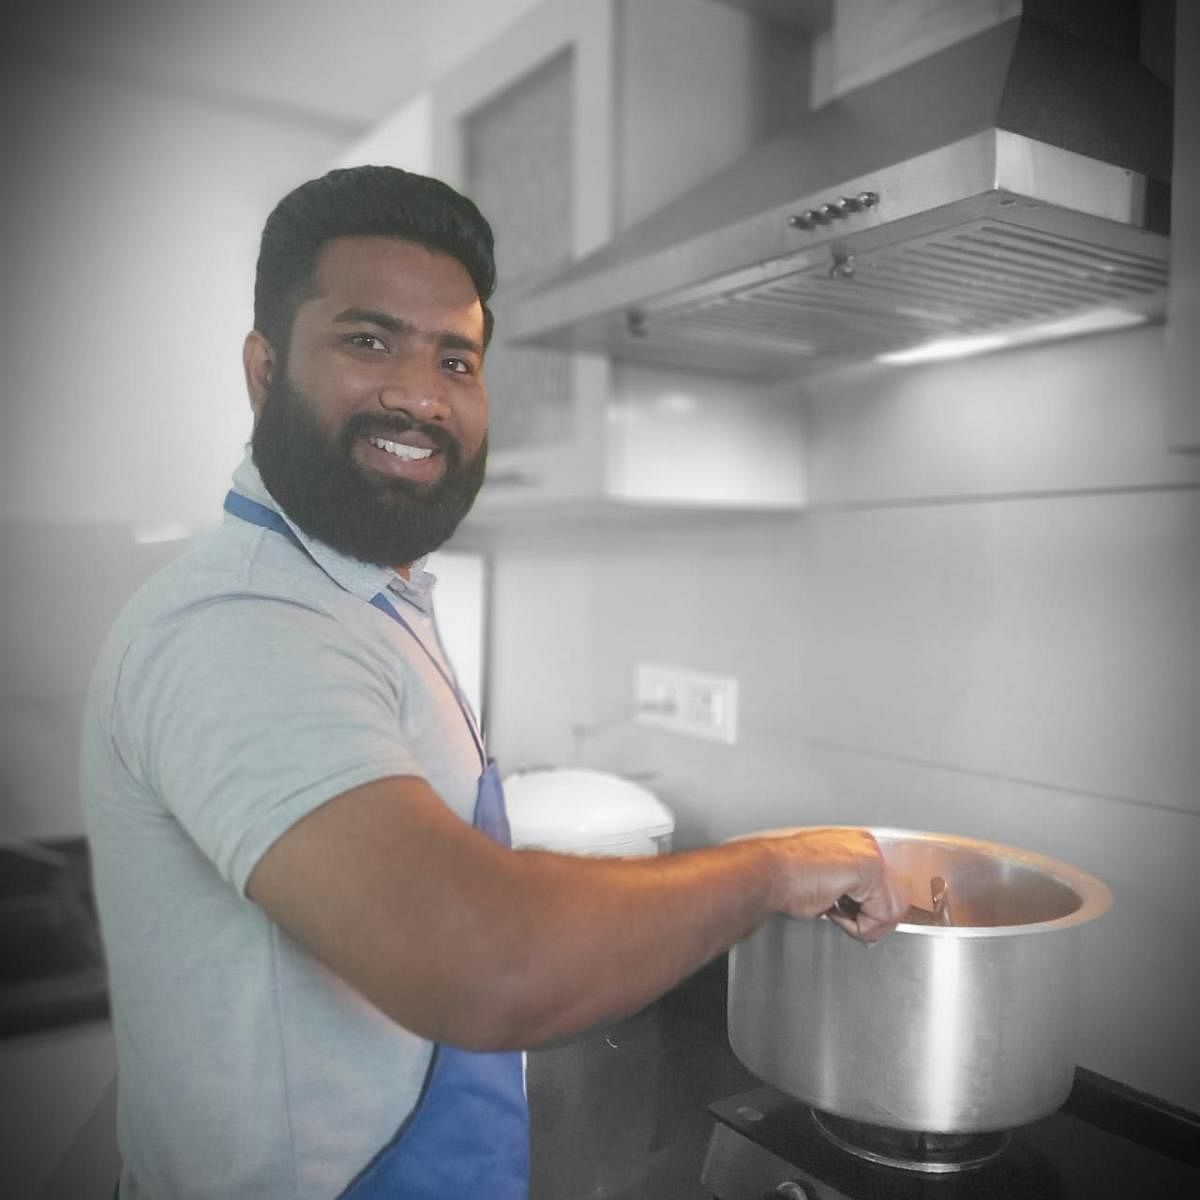 Praveen TR provides homecookedmeals for his colleagues at Decathlon.